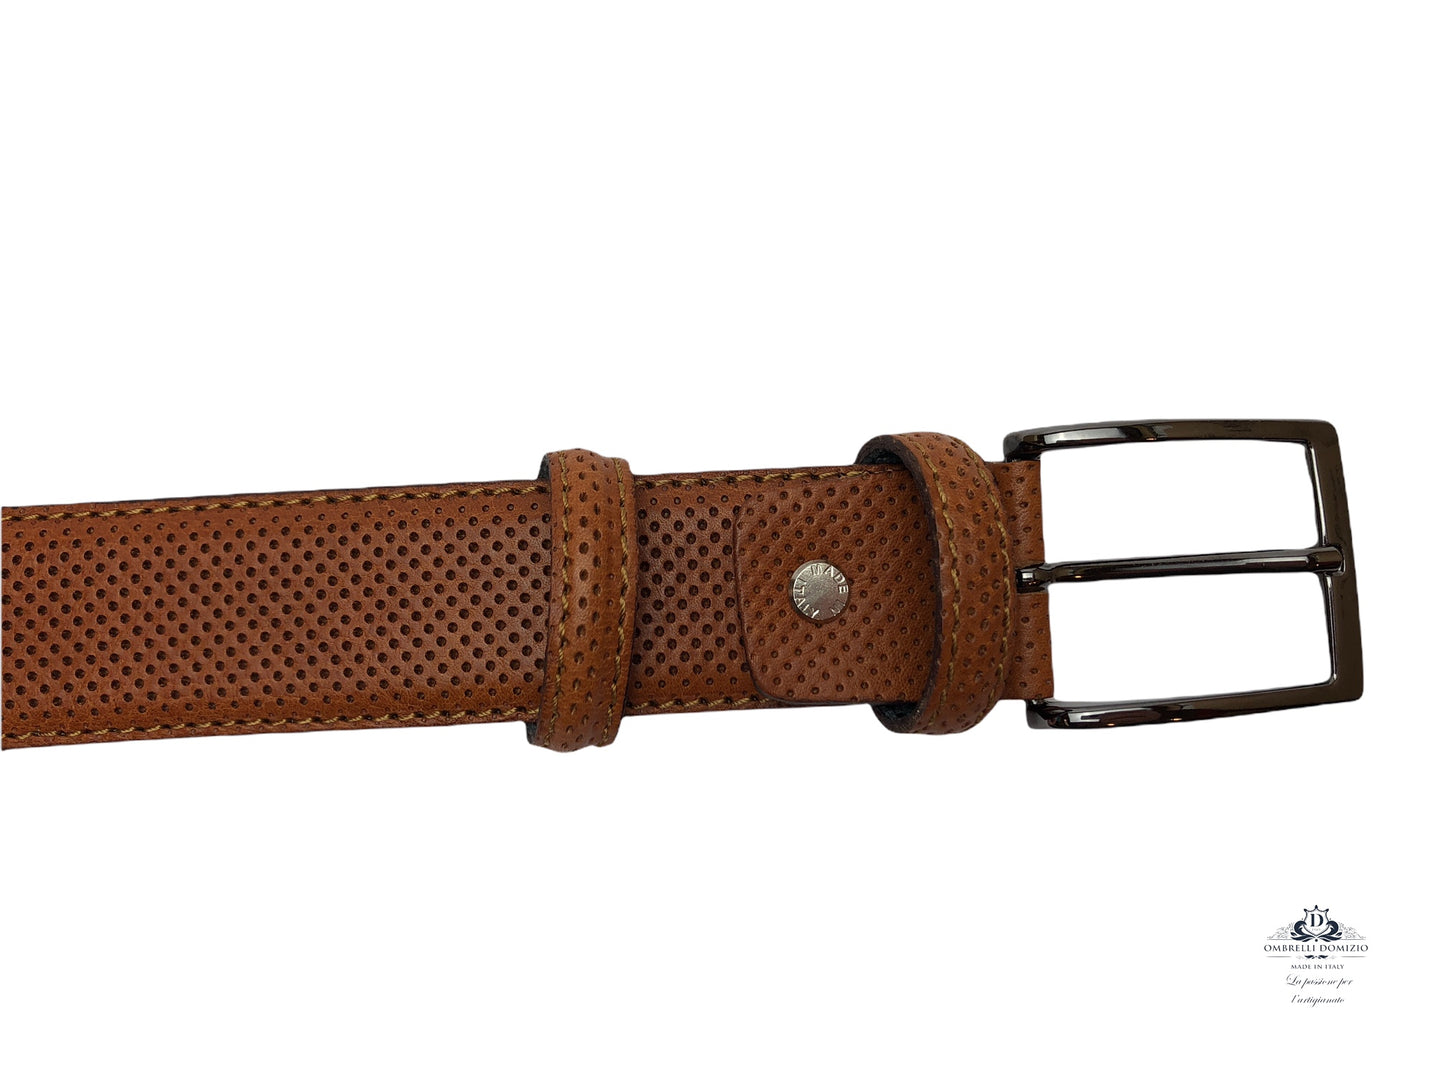 Pressed leather belt Honeycomb col. Artisanal Made in Italy leather